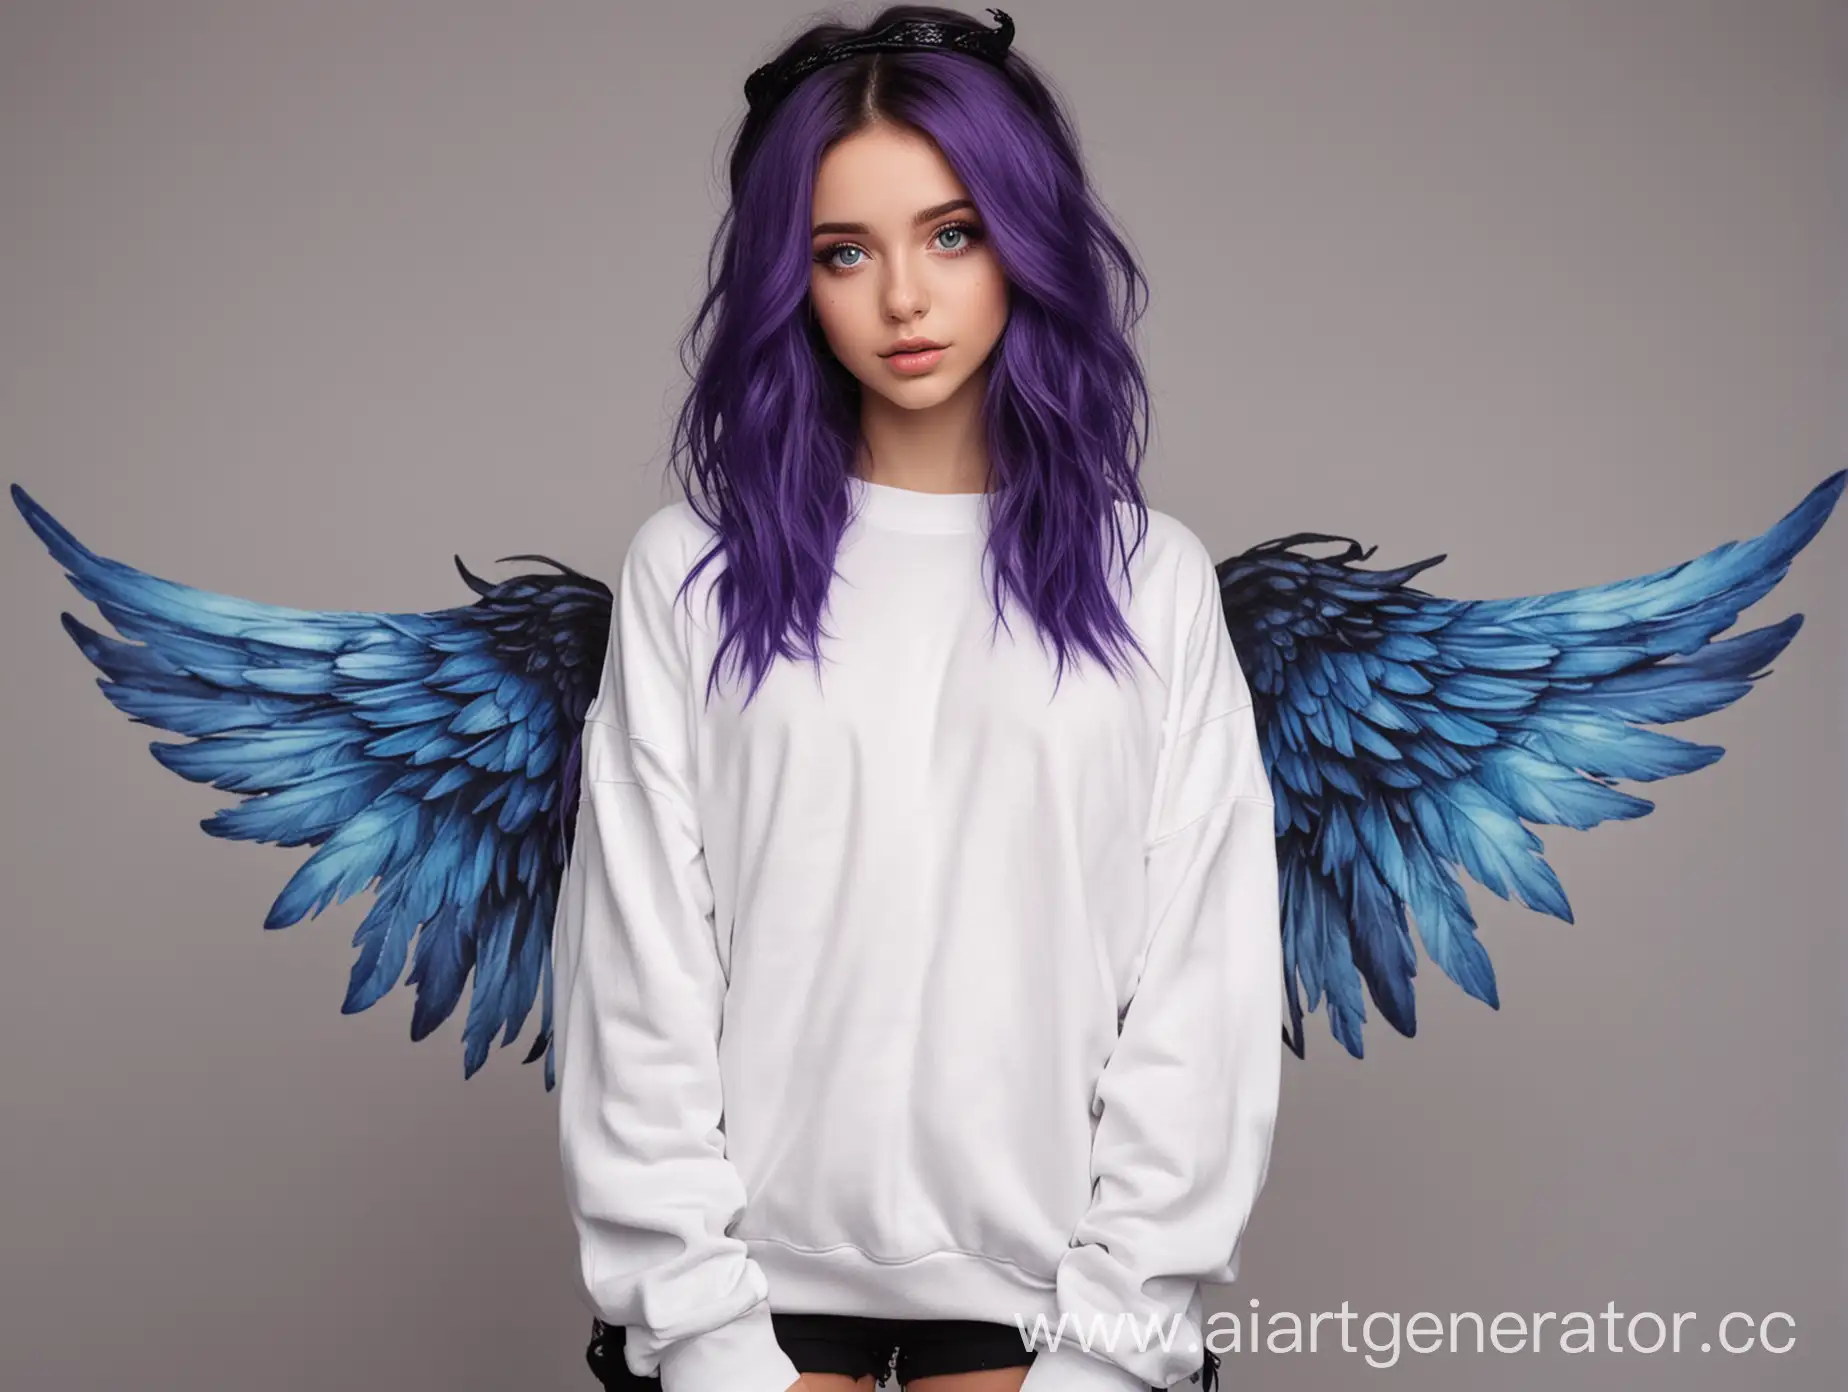 Adorable-Girl-in-Stylish-Monochrome-Outfit-with-Purple-Hair-and-Halo